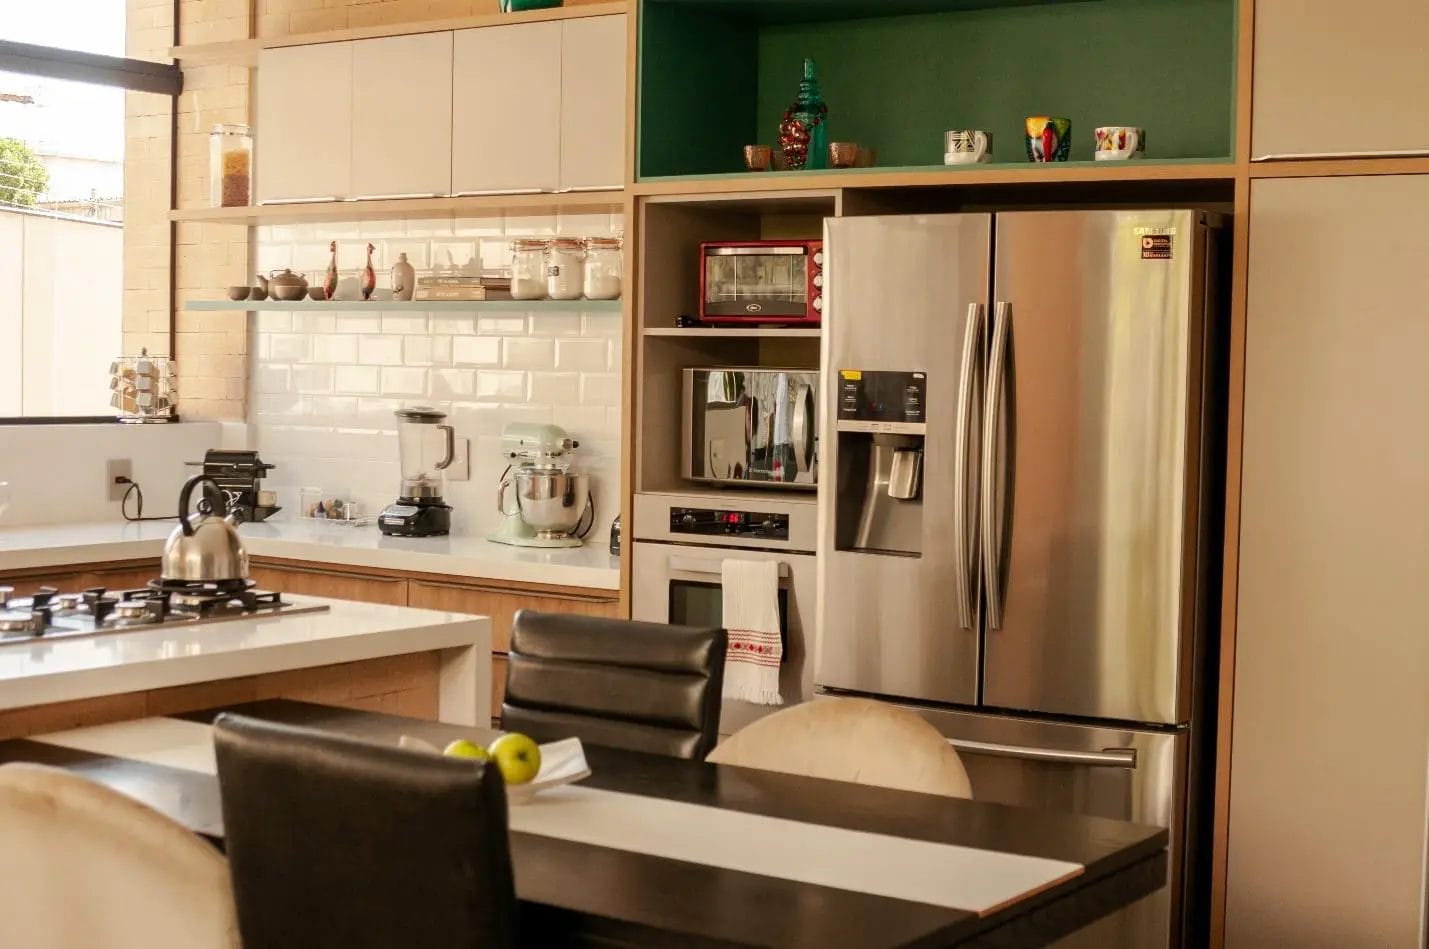 Pros and cons of owning a double-door refrigerator